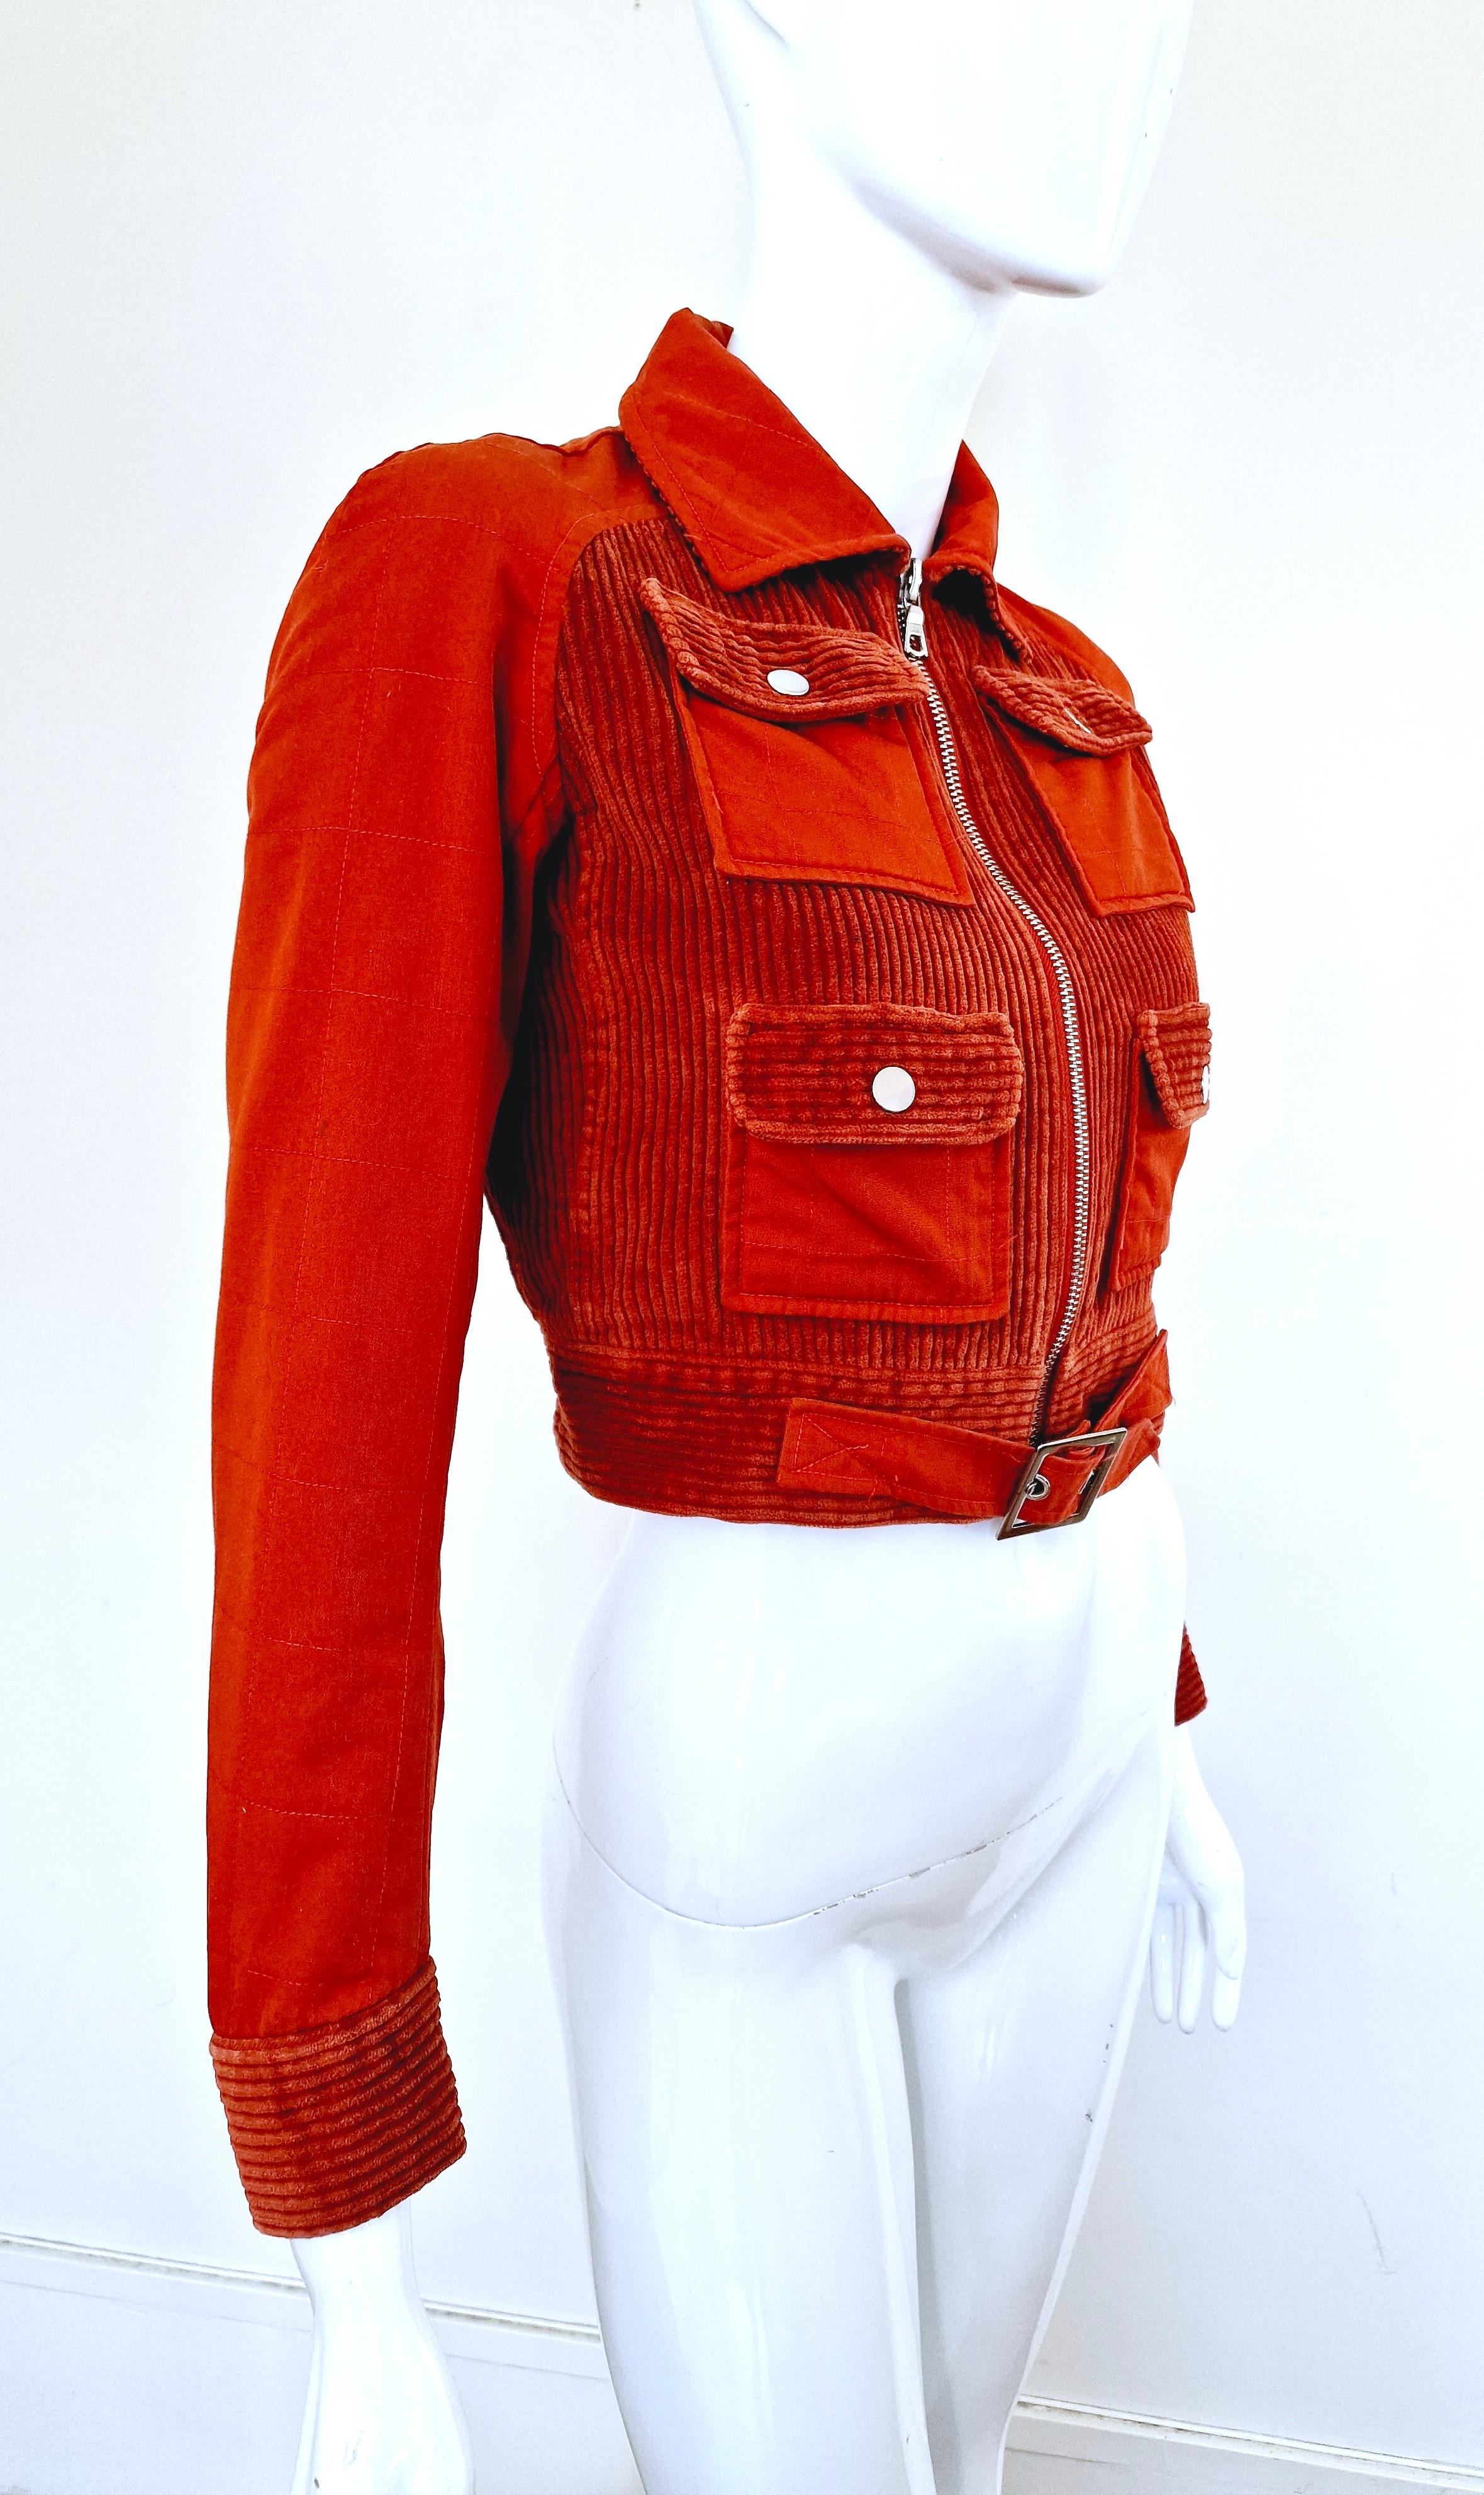 Cargo jacket by Courrèges!
4 pockets.
Metal belt.

VERY GOOD condition! Light signs of wear on the metal belt, please, see the last photo. 

SIZE
X-small.
Length: 41 cm / 16.5 inch
Bust: 46 cm / 18.1 inch 
Waist: 35 cm / 13.8 inch
Shoulder to